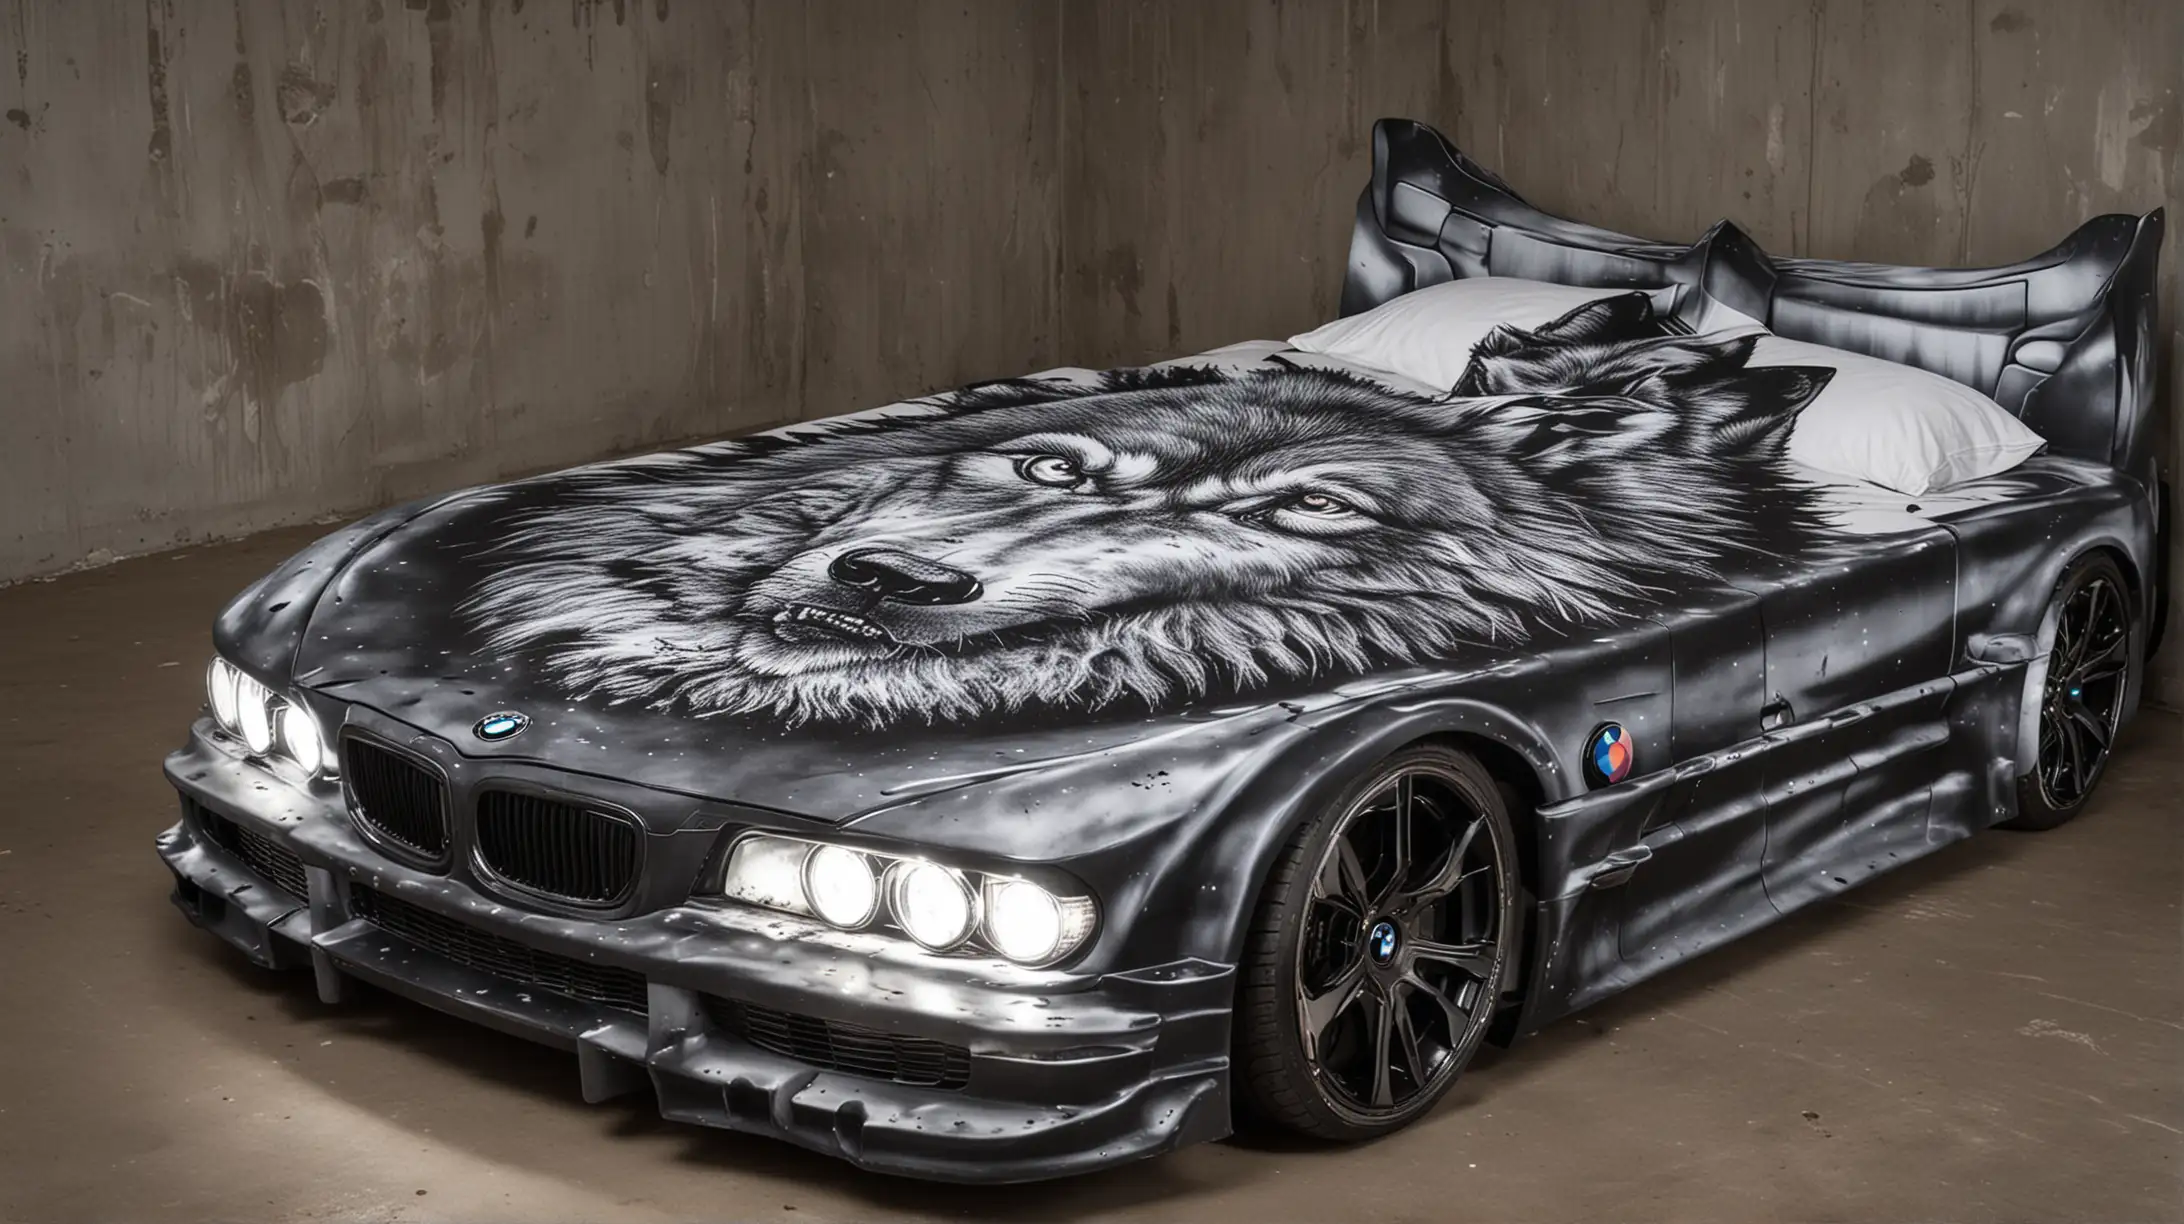 Double bed in the shape of a BMW car with headlights on with evil wolf graphitti